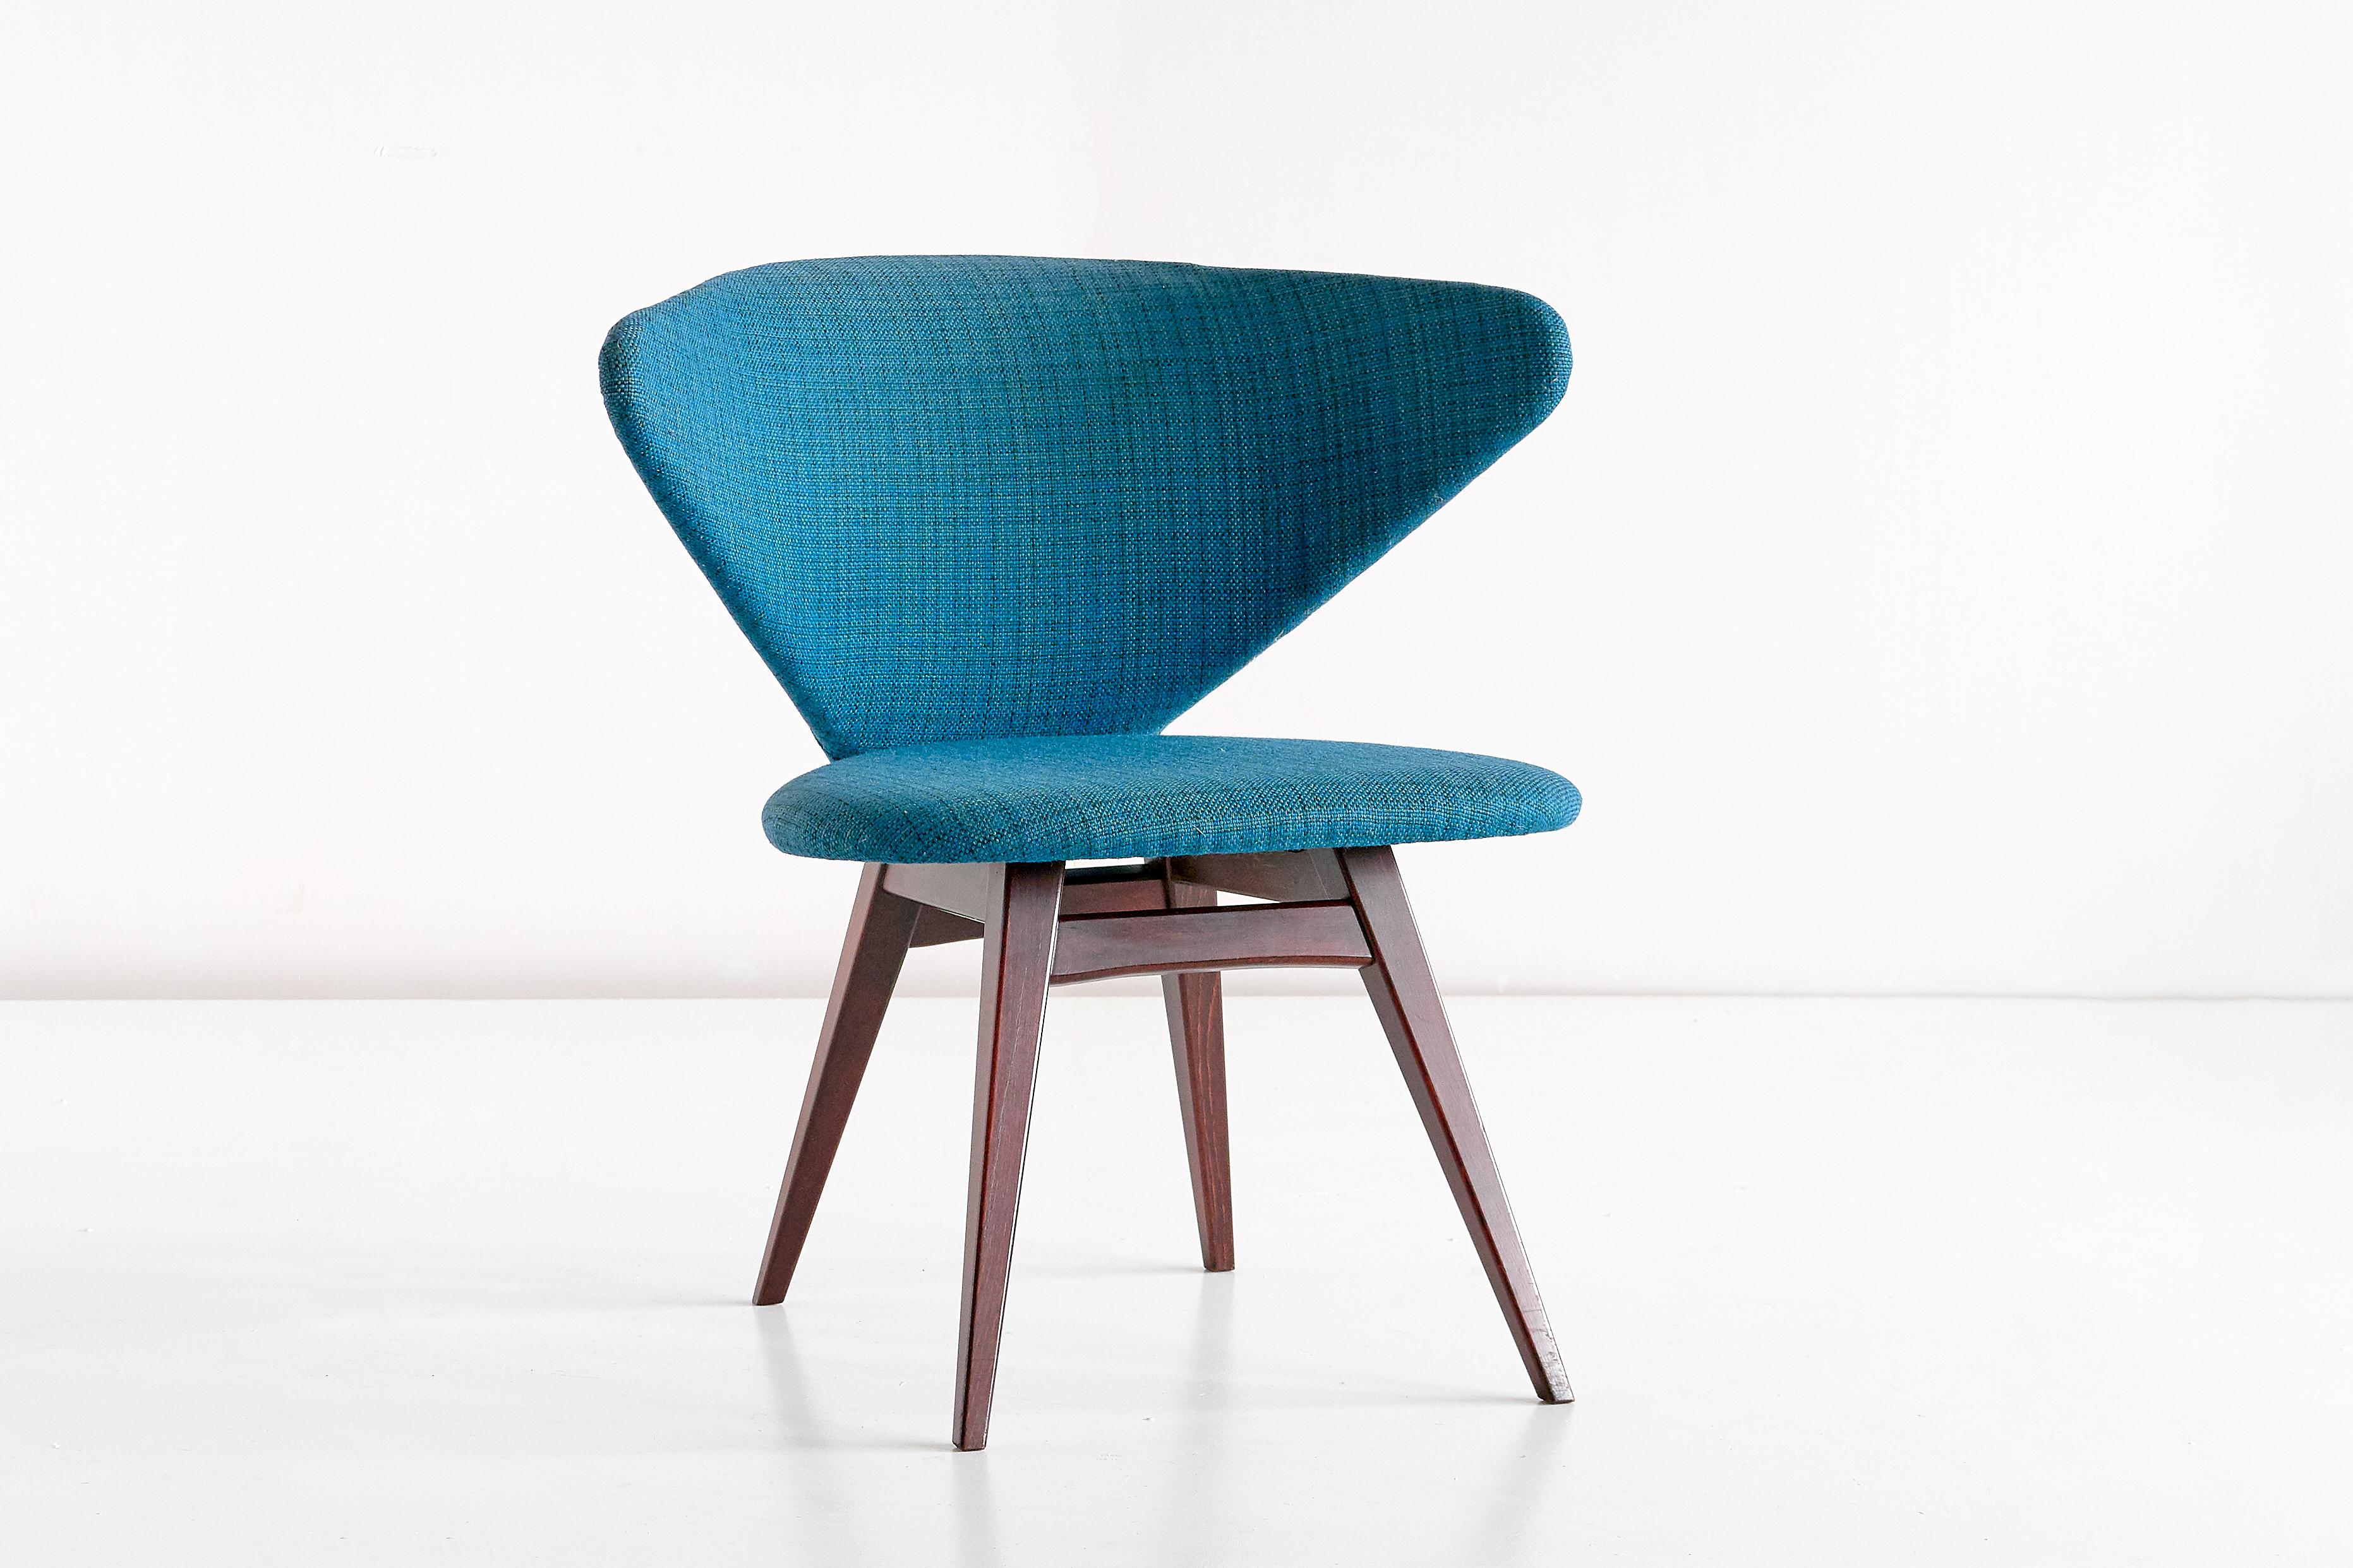 Stained Sigfrid Ljungqvist Wing Shaped Chair, Petrol Blue Fabric and Beech, Sweden, 1958 For Sale